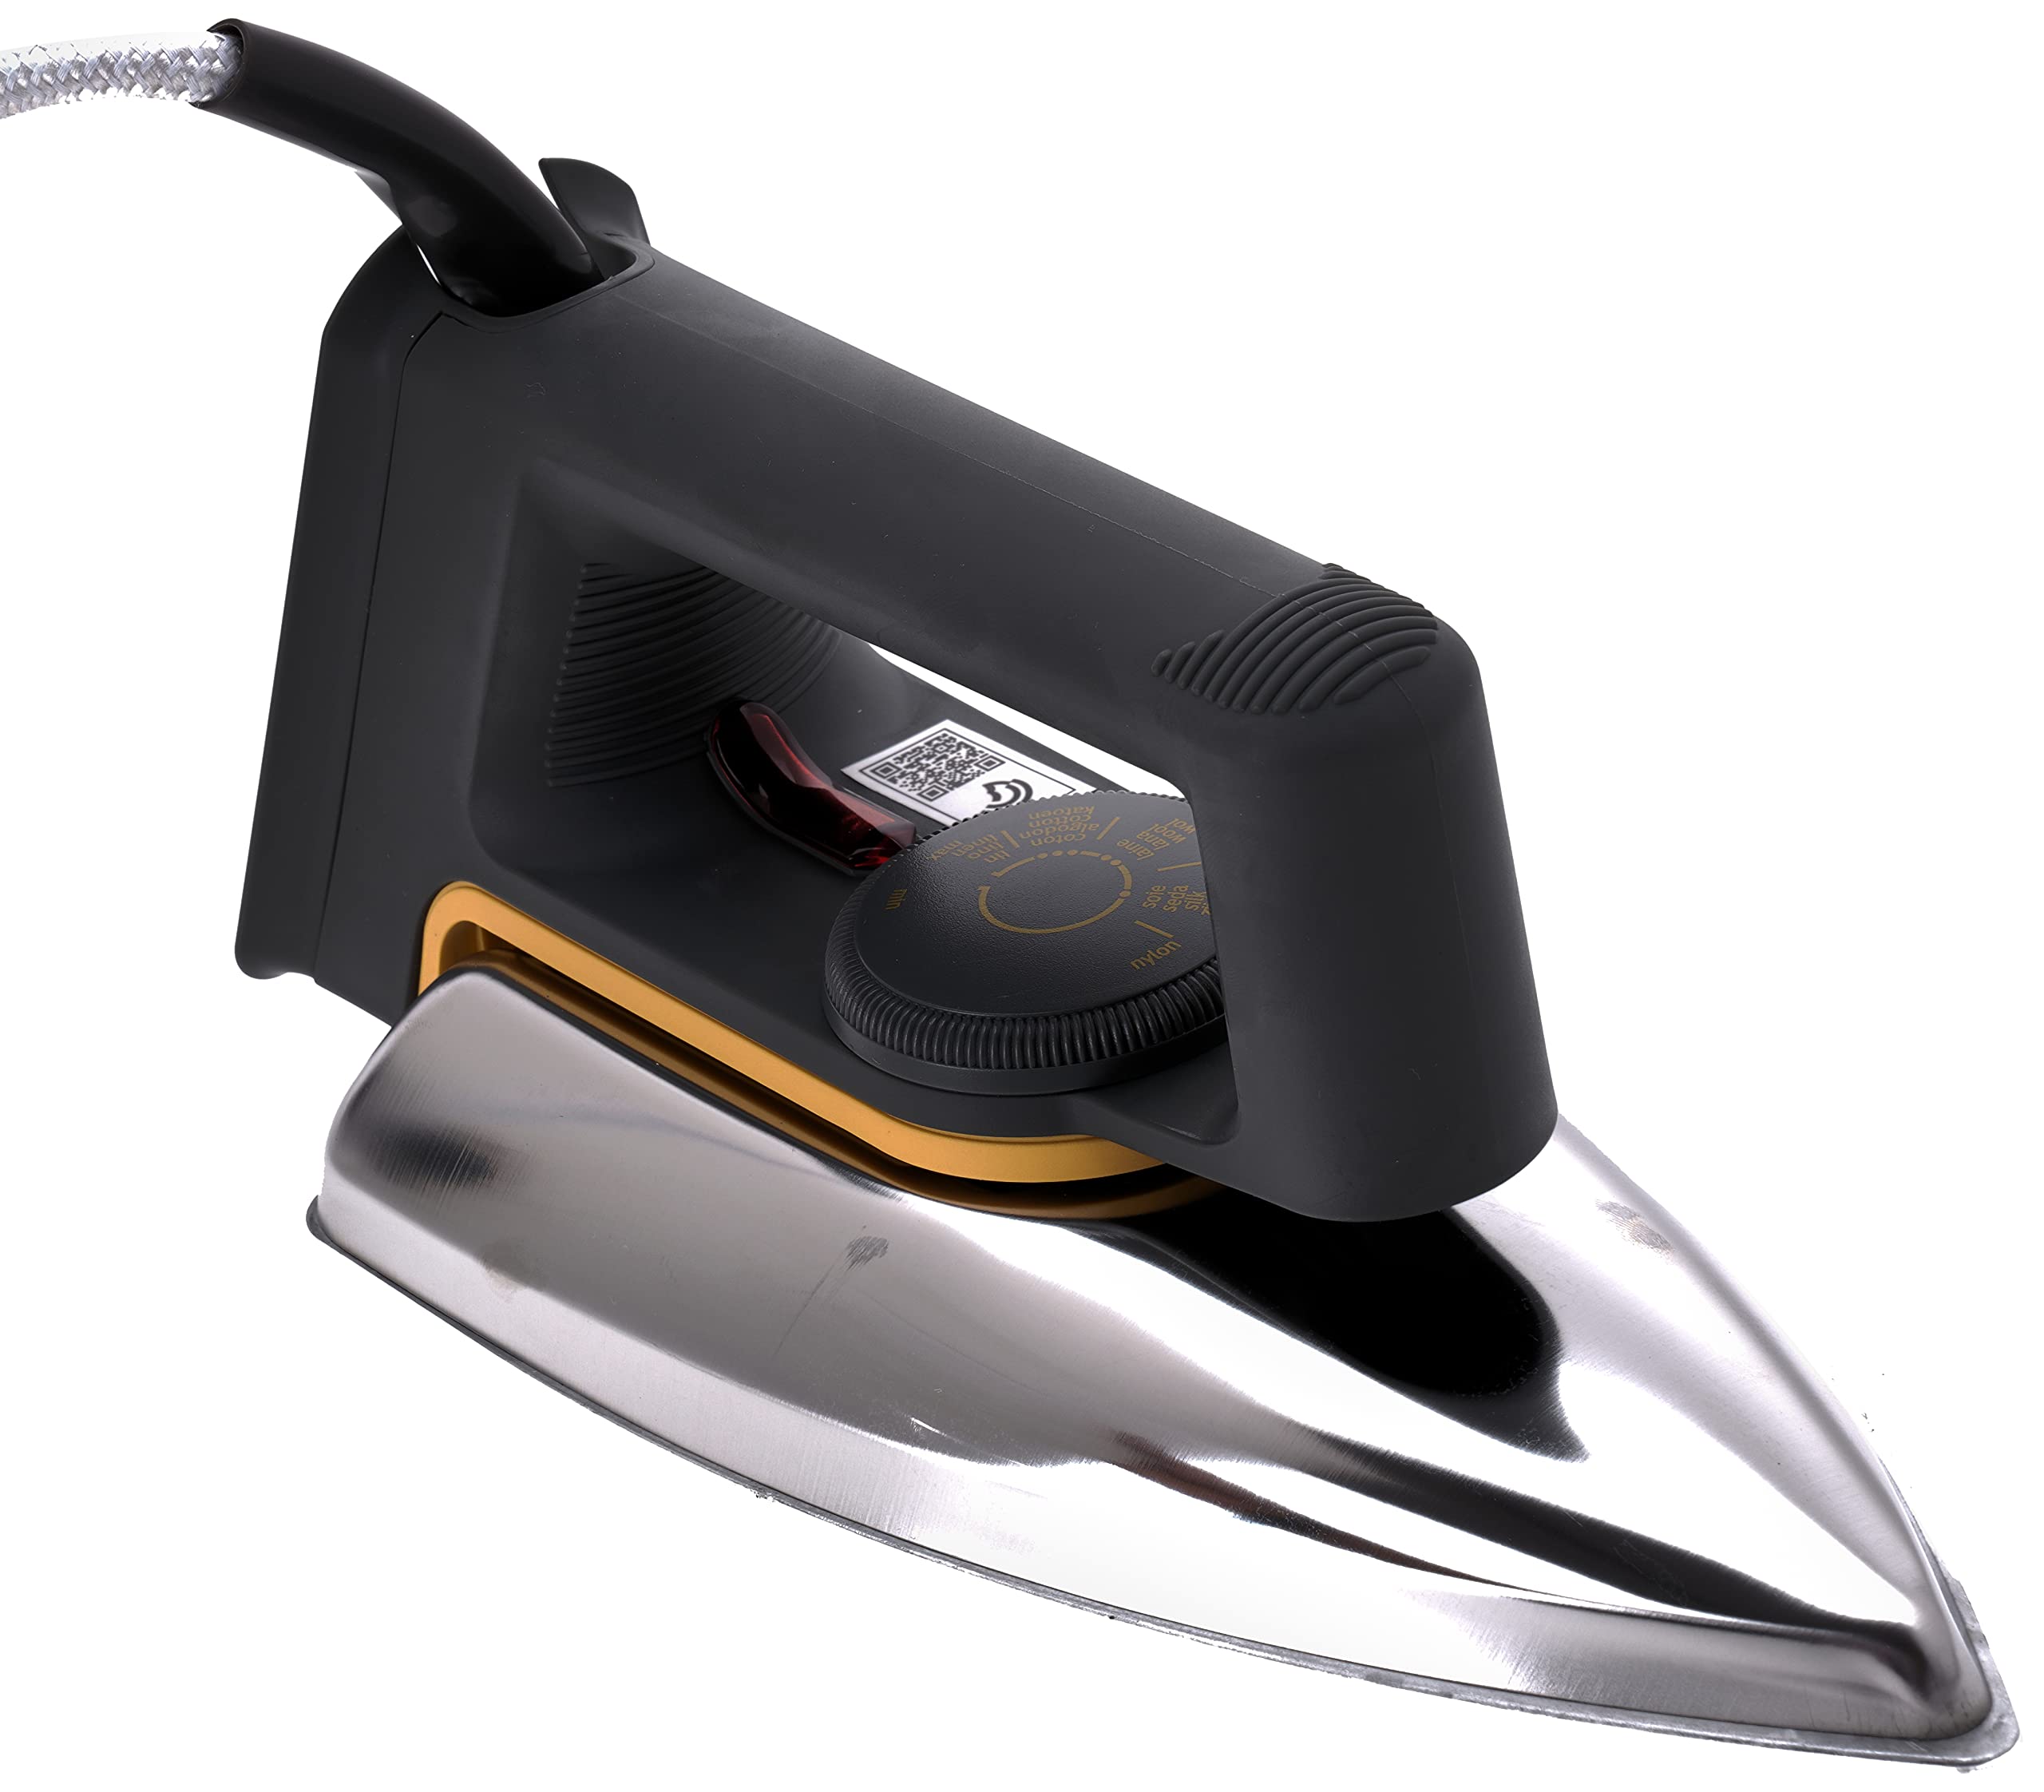 PHILIPS Dry Iron - Non-Stick & Scratch Resistant Aluminum Soleplate - 1000W - 50/60Hz - Classic HD1172/27